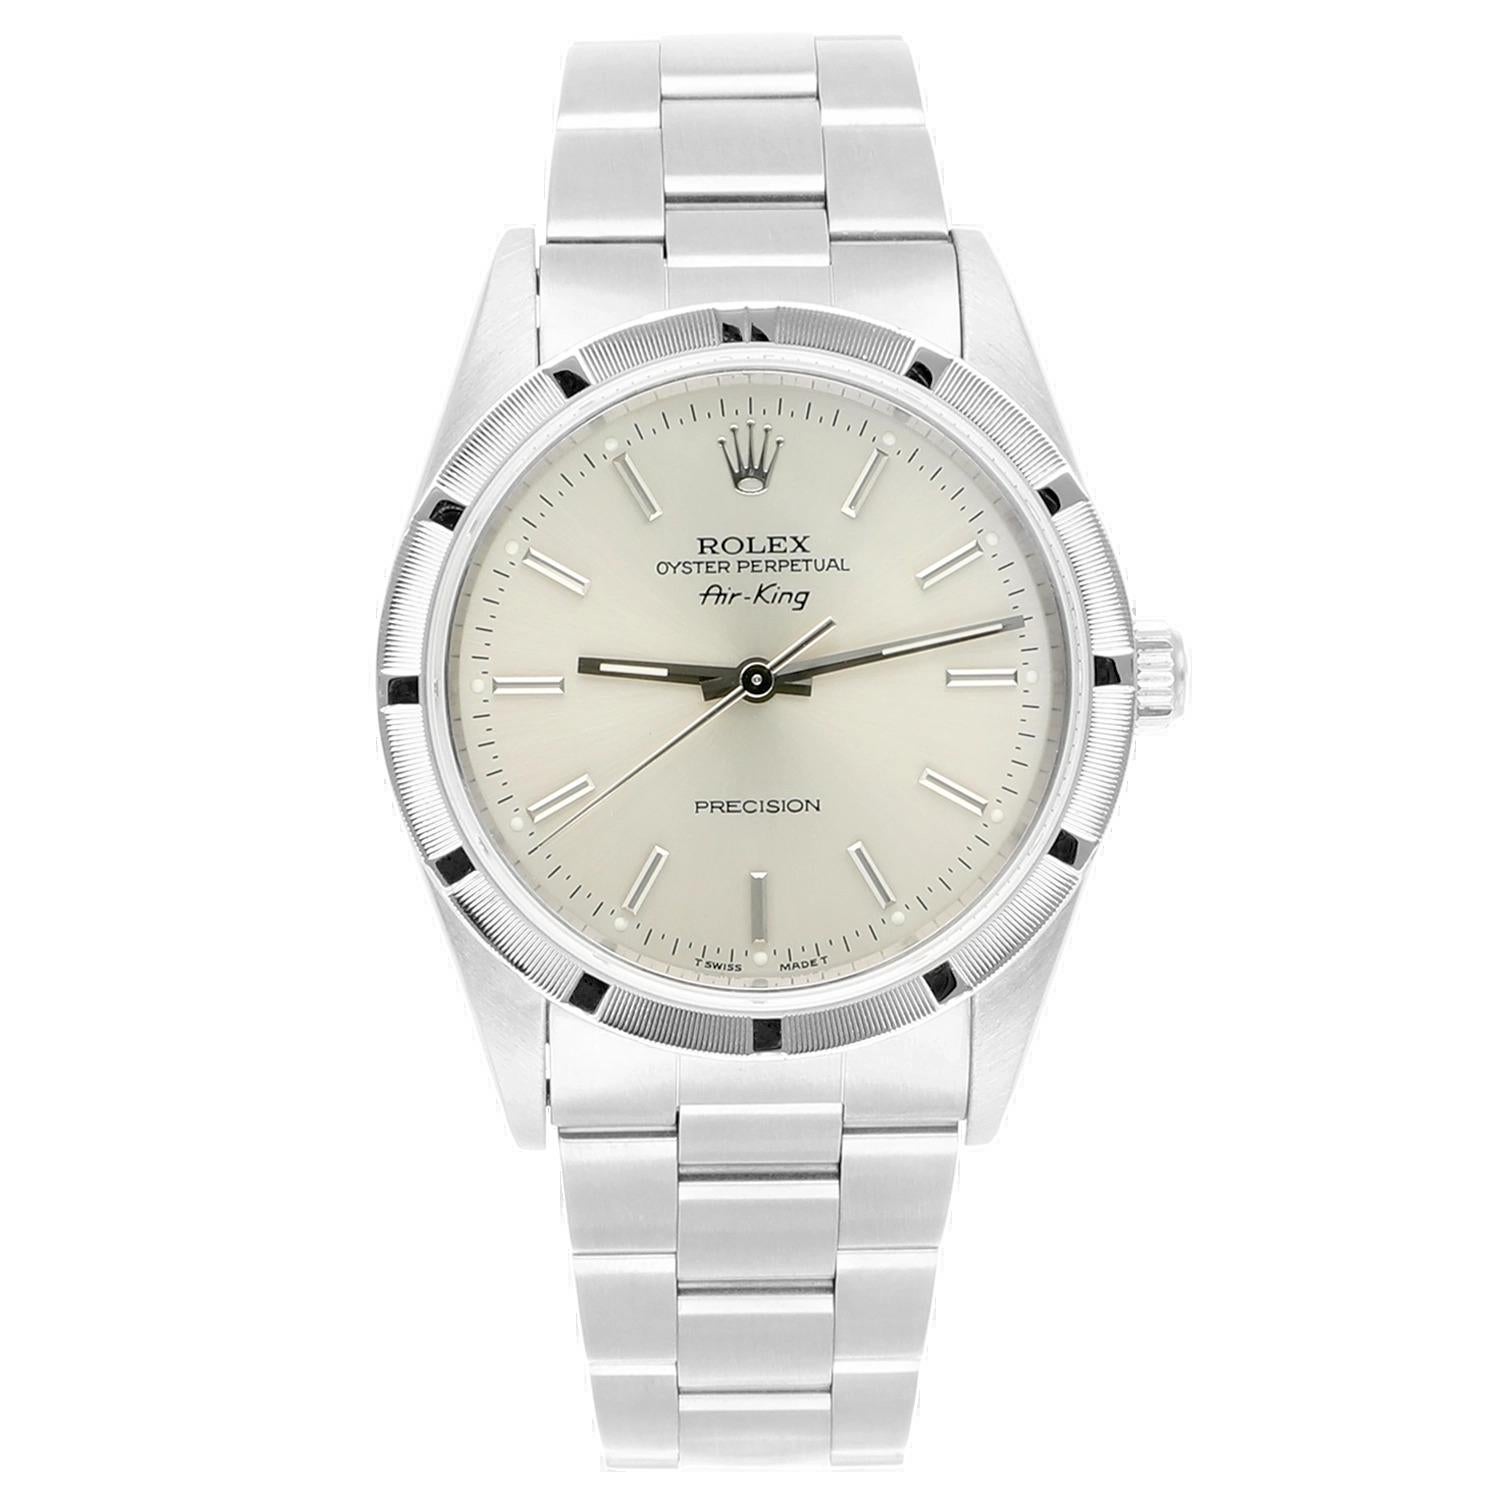 Rolex Air King 34mm Silver Dial Engine Turned Bezel Steel Mens Watch 14010, Circa 1996
This watch has been professionally polished, serviced and is in excellent overall condition. There are absolutely no visible scratches or blemishes. Authenticity